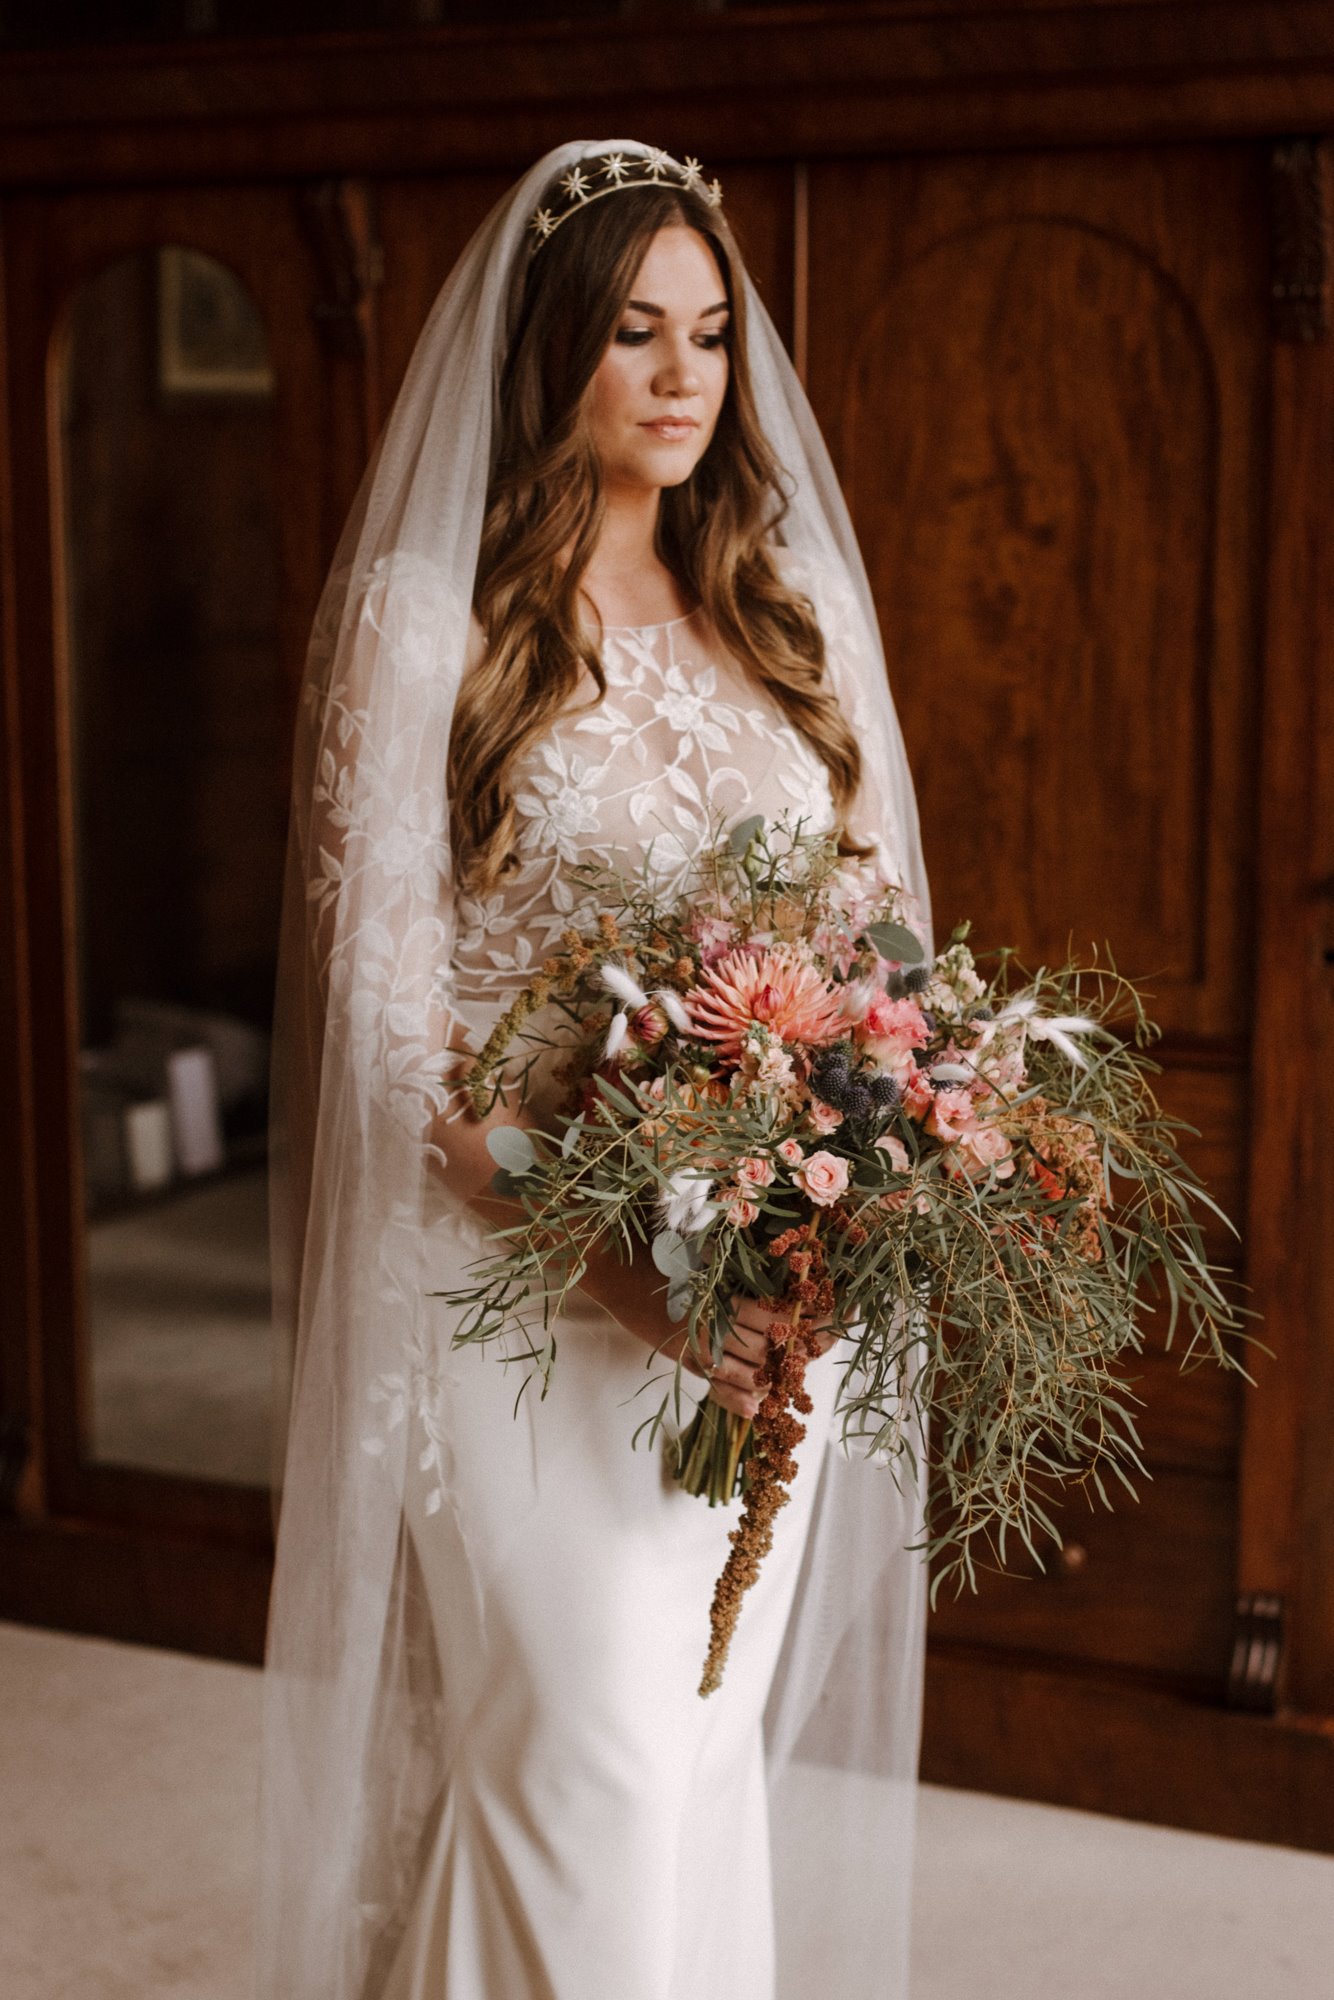 beautiful boho bride in lace gown, star crown, long veil and trailing bouquet of pink and greenery